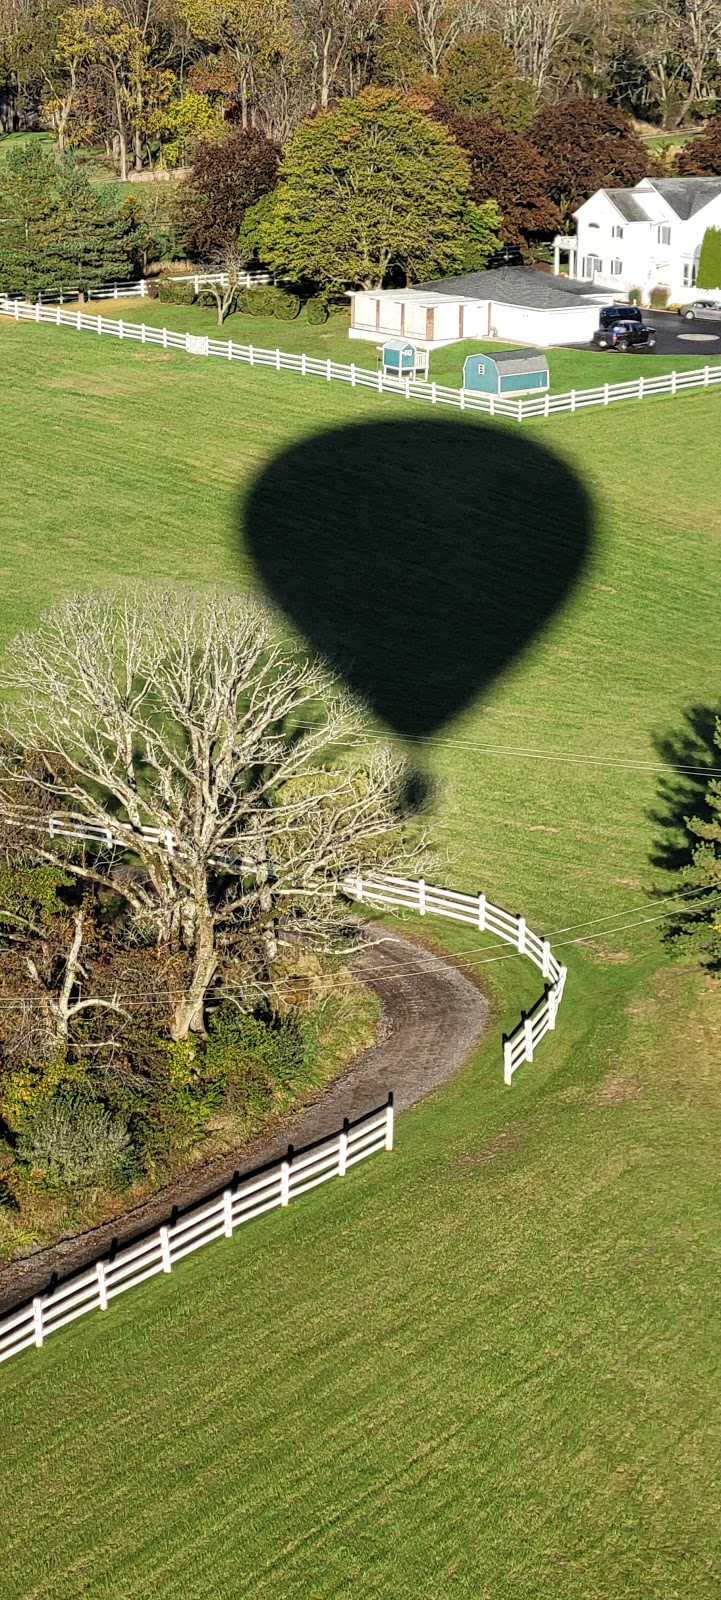 A-Lot-A Hot Air Balloon Rides | 211 Sidney Rd, Pittstown, NJ 08867 | Phone: (908) 996-4233